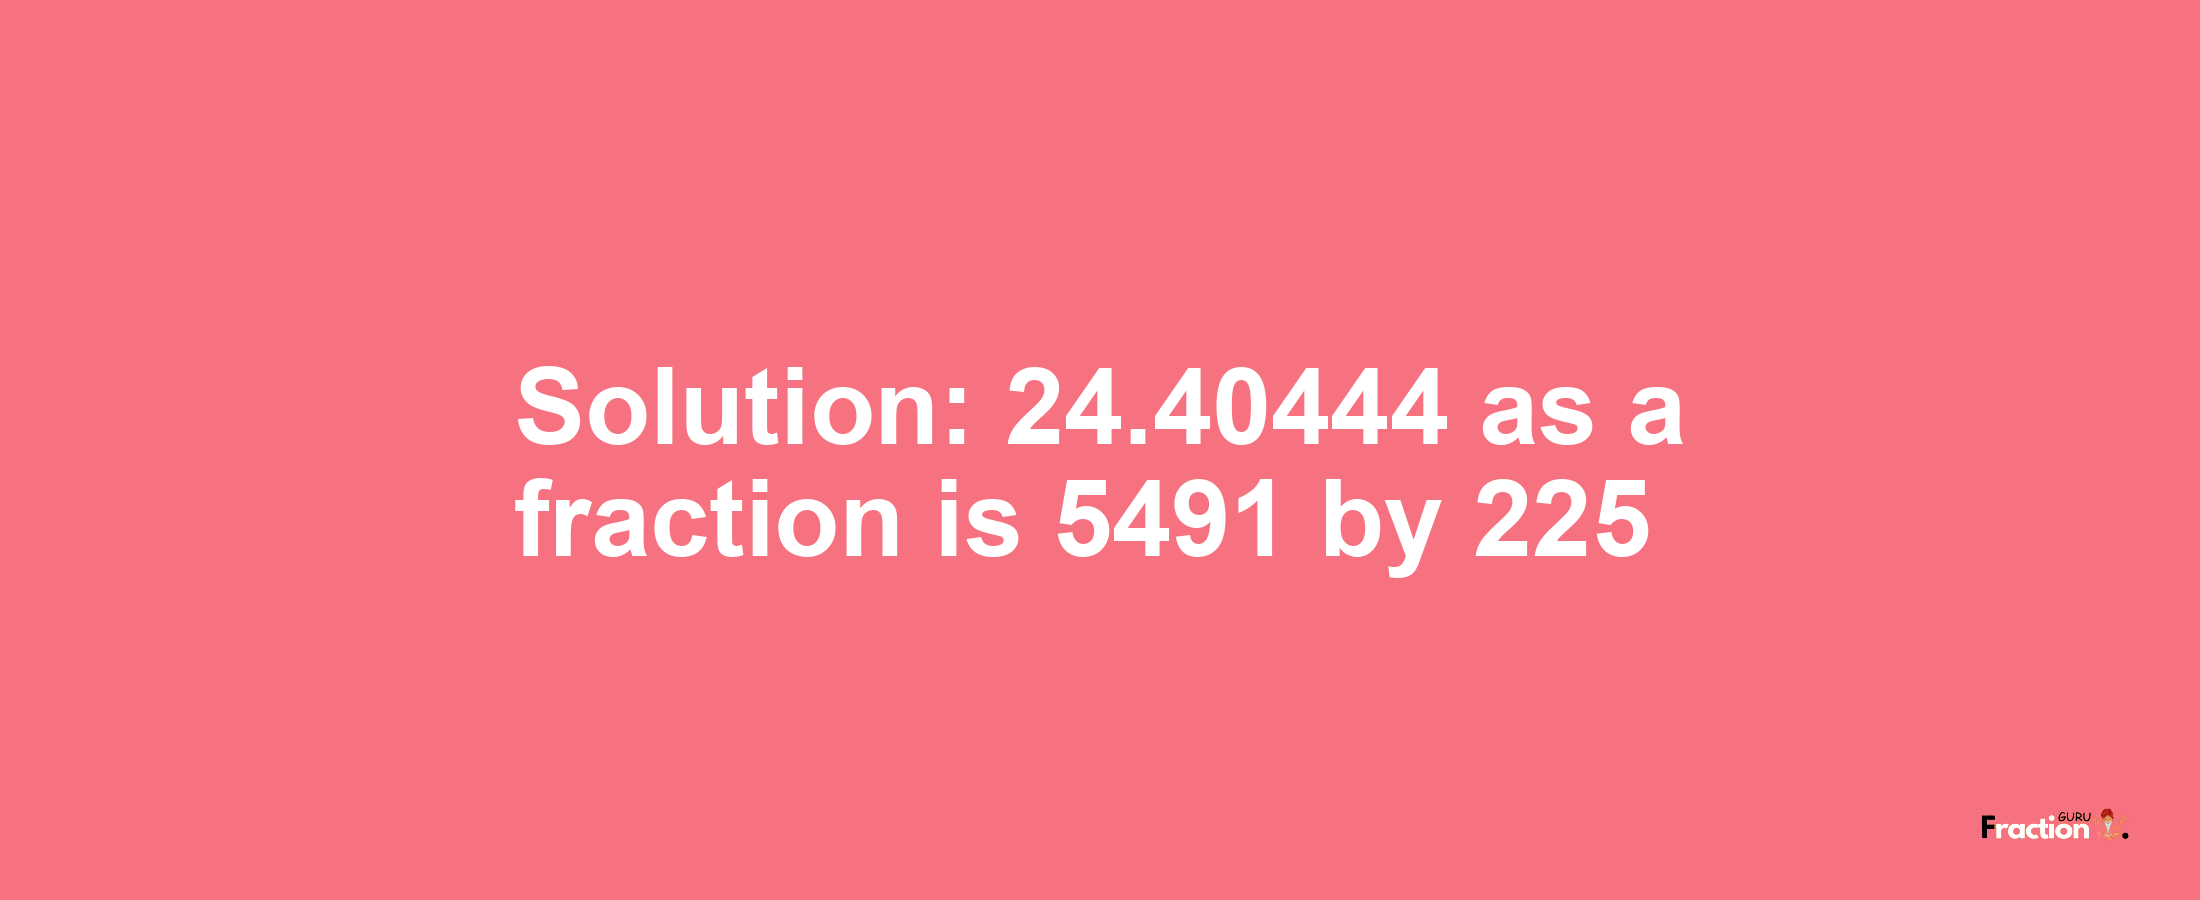 Solution:24.40444 as a fraction is 5491/225